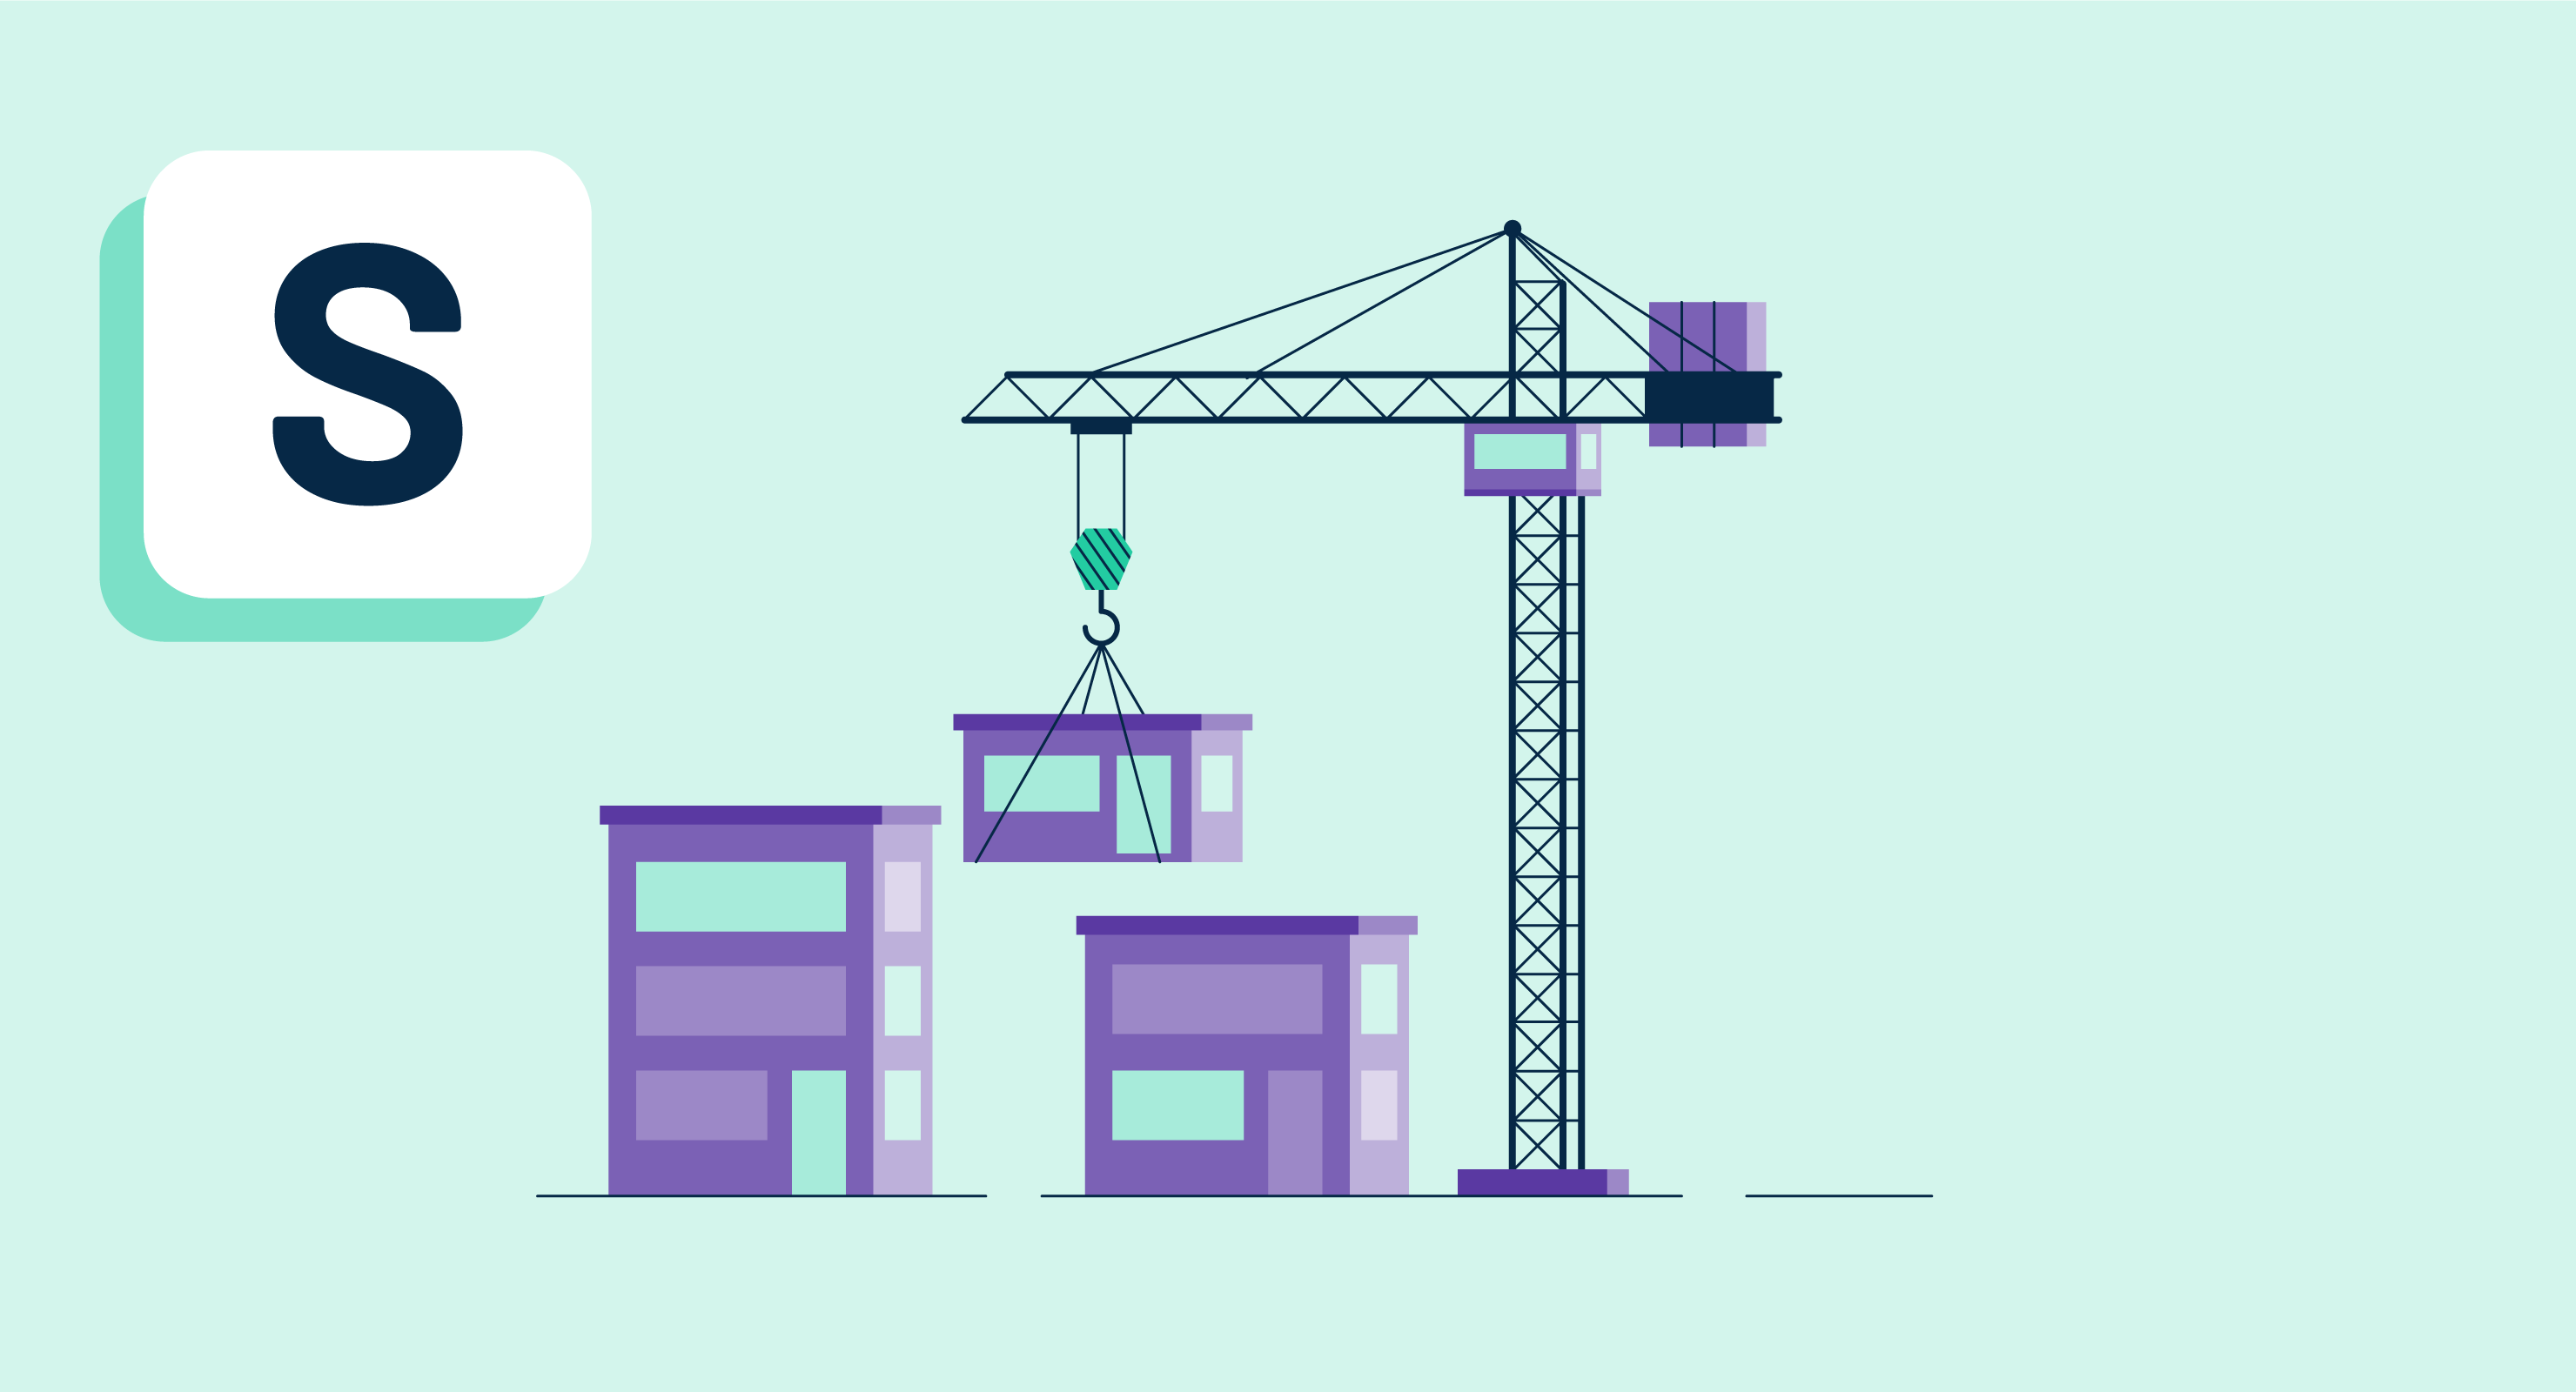  A purple building block is being lifted by a crane to be placed on top of another building block representing the need to consider factors for cloud service scalability.